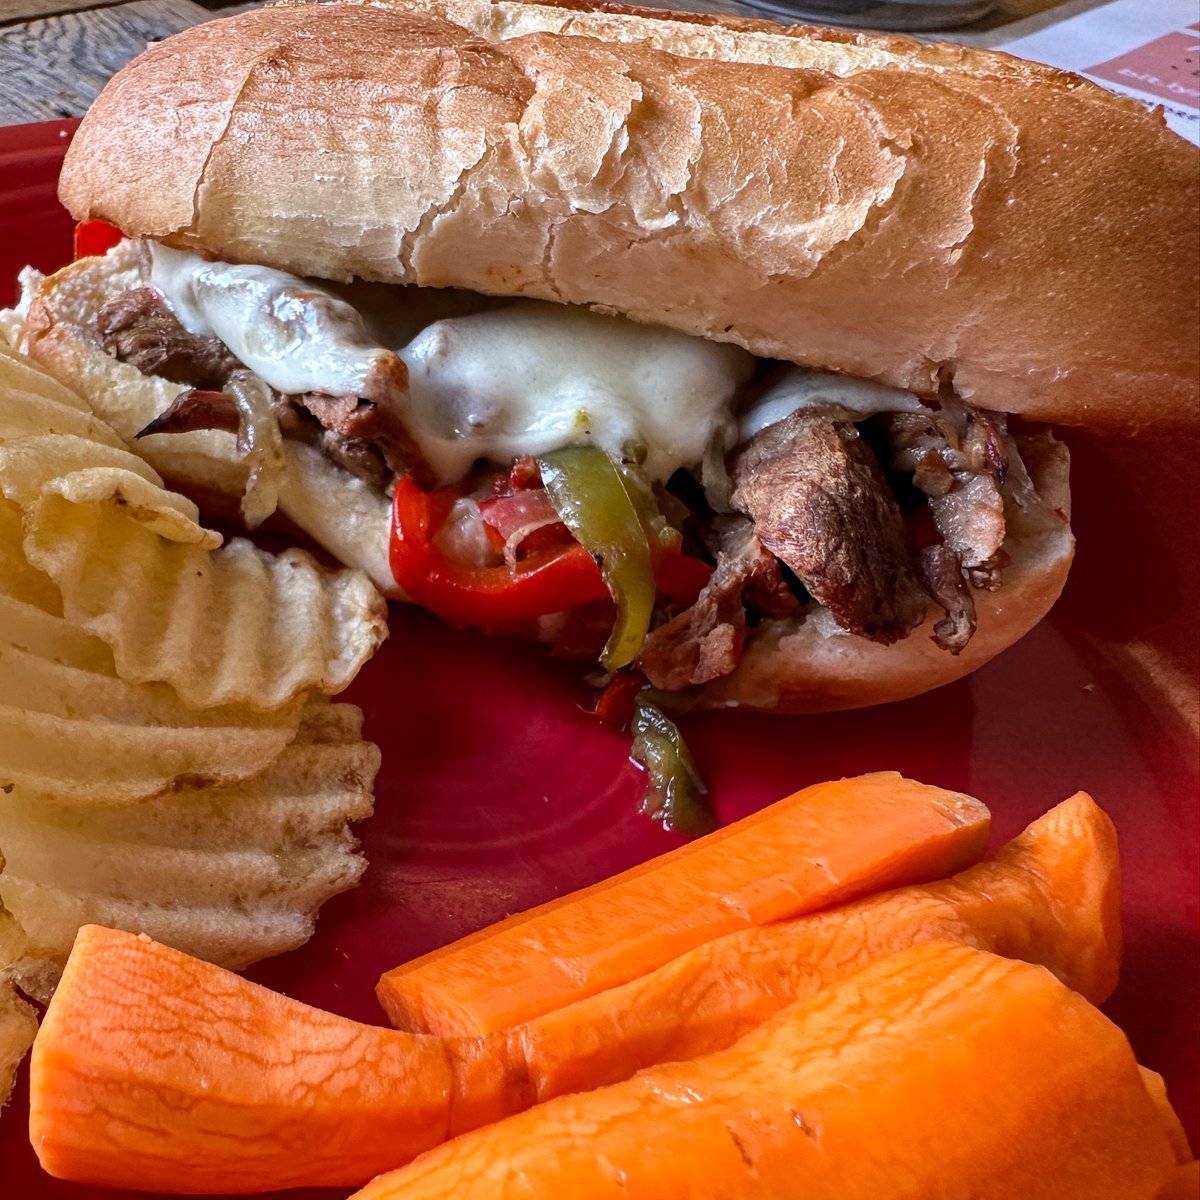 Crockpot Philly Cheesesteak justabunchofcrock.com/2023/09/19/cro… 

Made this recipe last night. So happy with how it turned it! Added the recipe to my blog and shared the link below. Let me know if you give it a try!
#justabunchofcrock #NewRecipeAlert